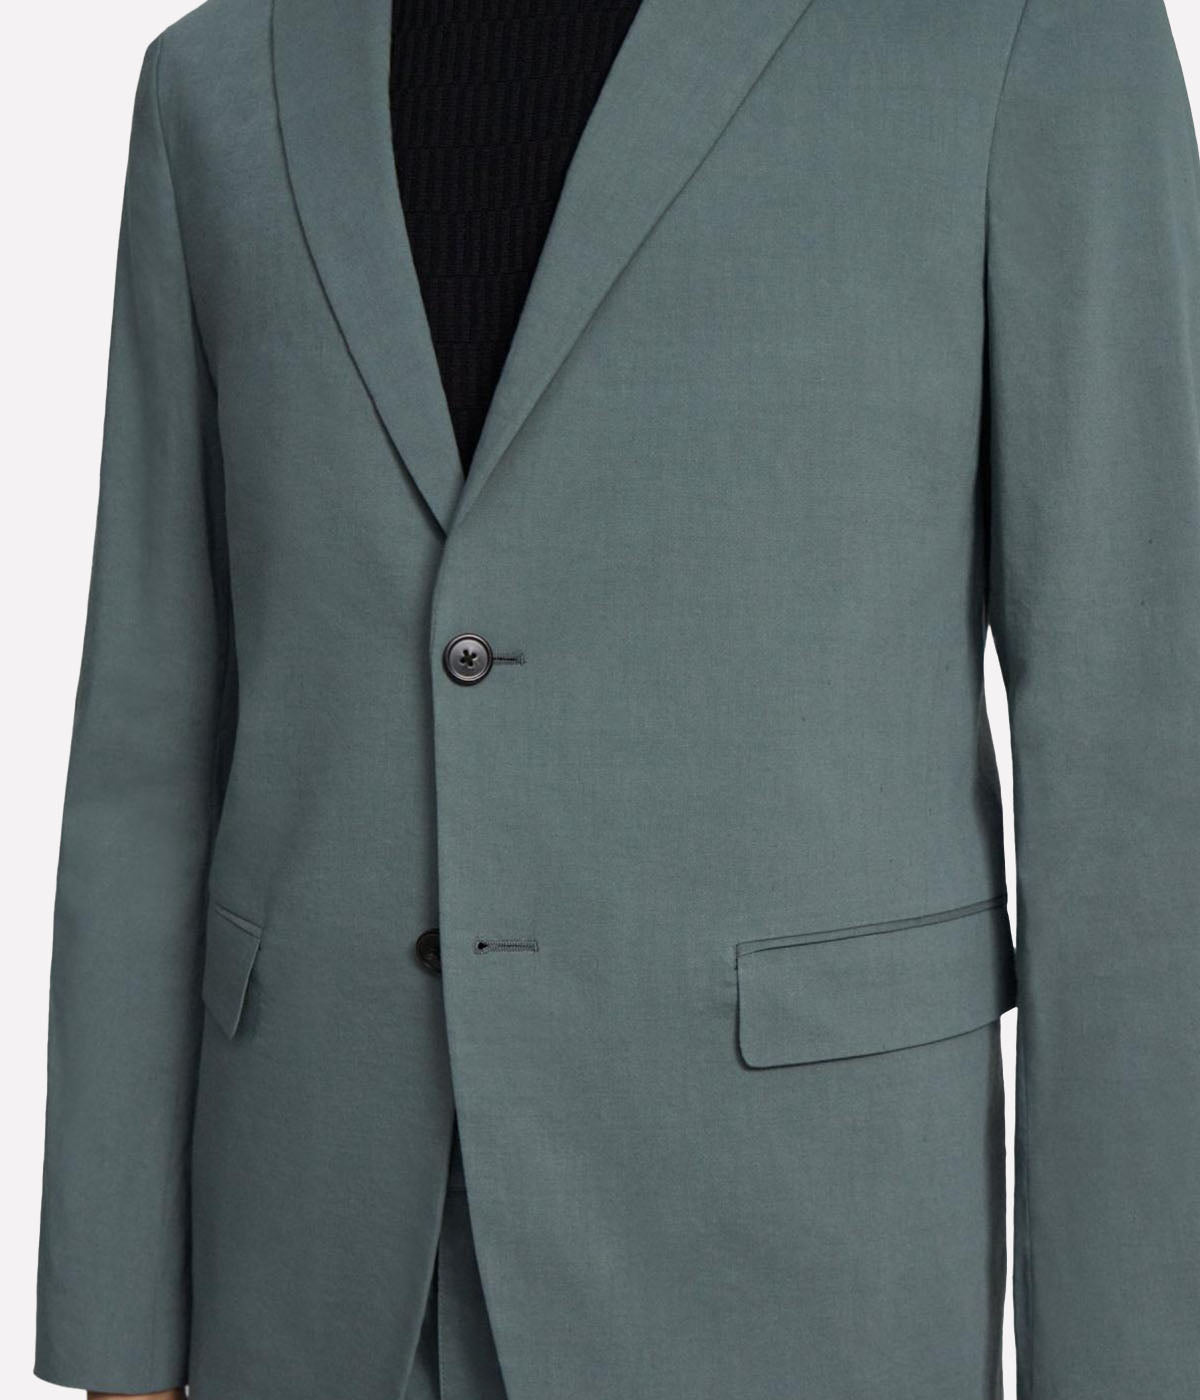 Clinton Eco Crunch Linen Blend Double-Breasted Sport Coat in Balsam Green